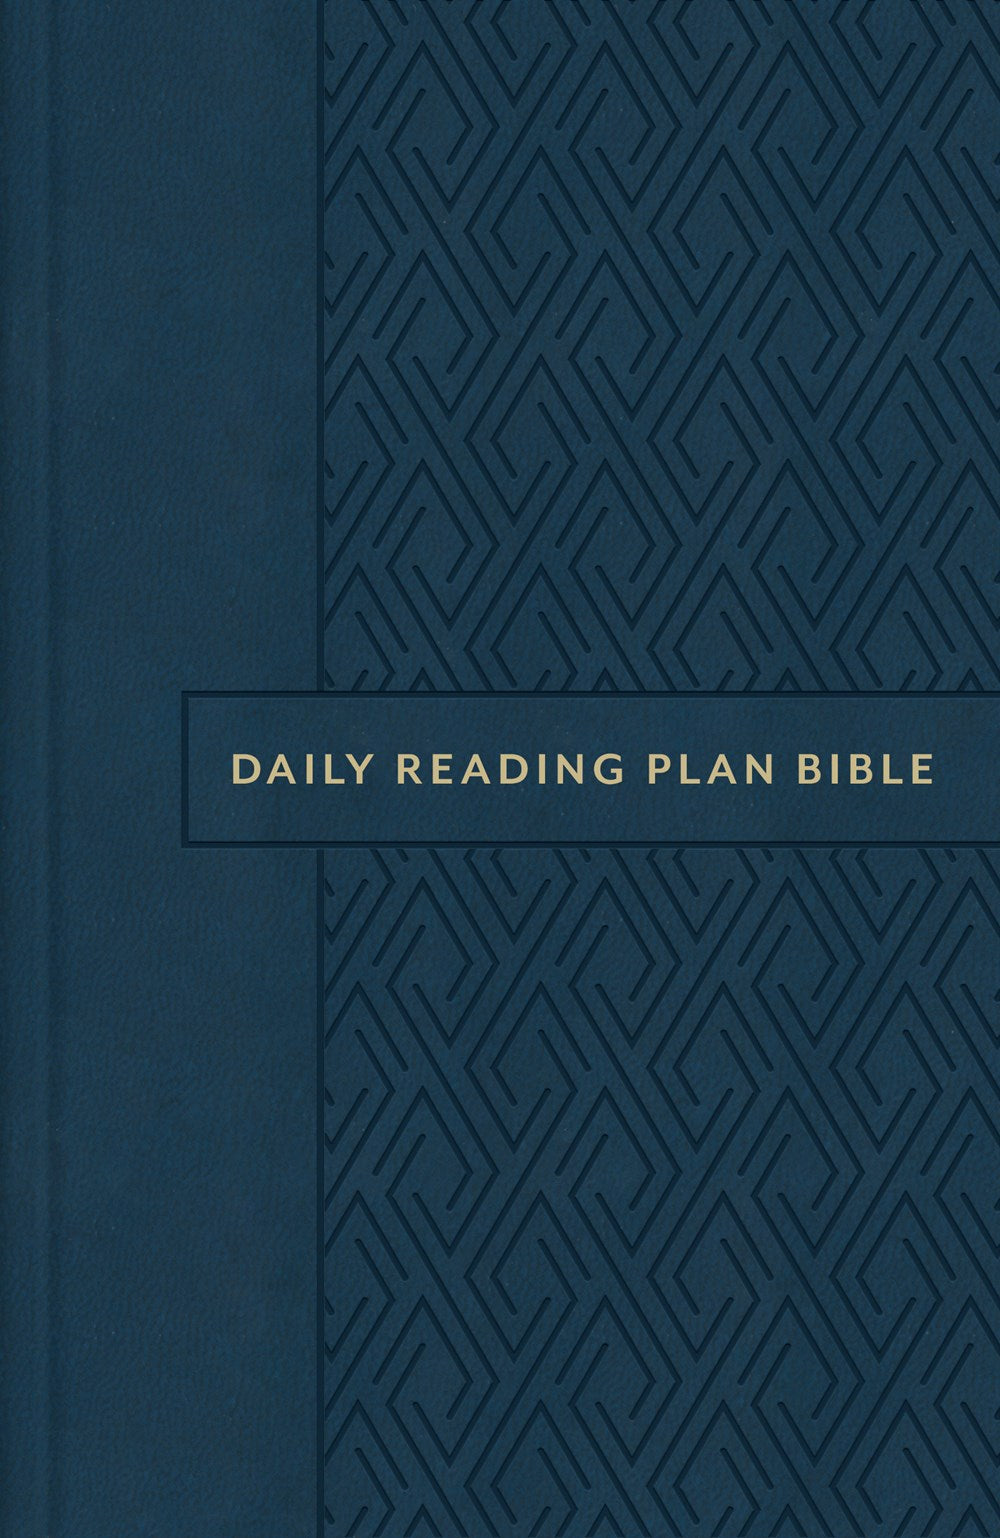 The Daily Reading Plan Bible [Oxford Diamond] - The Christian Gift Company